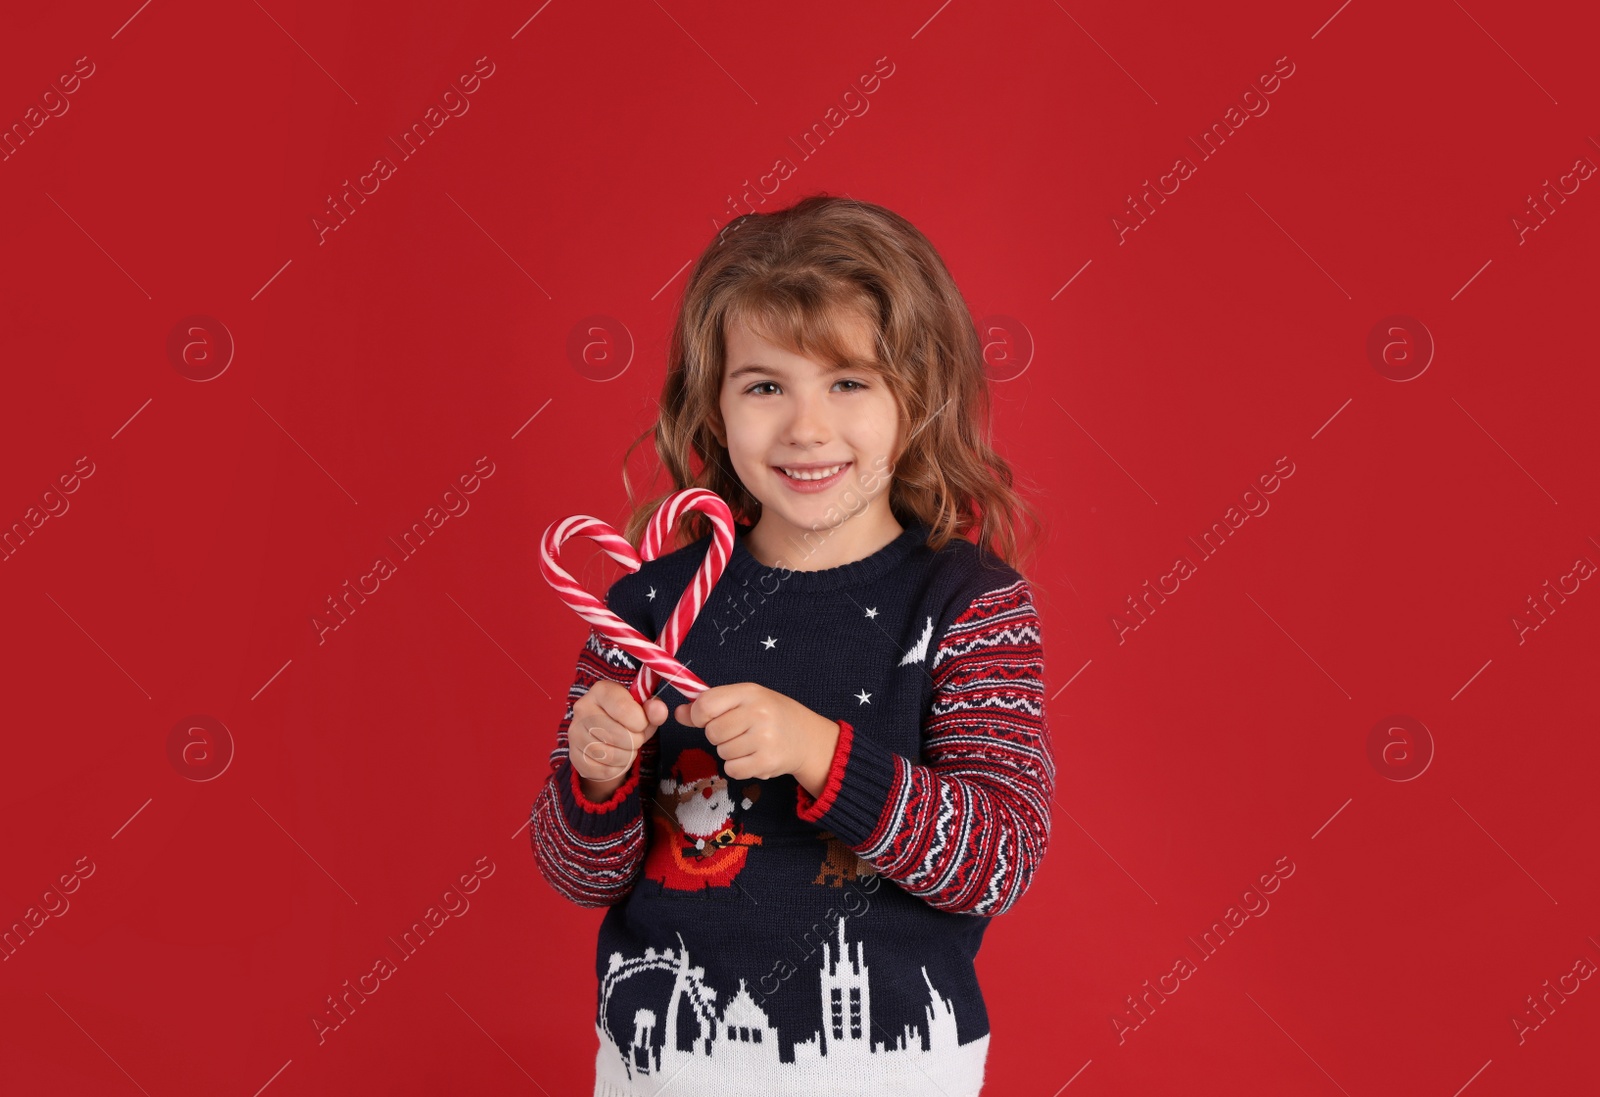 Photo of Cute little girl in Christmas sweater making heart shape with candy canes against red background